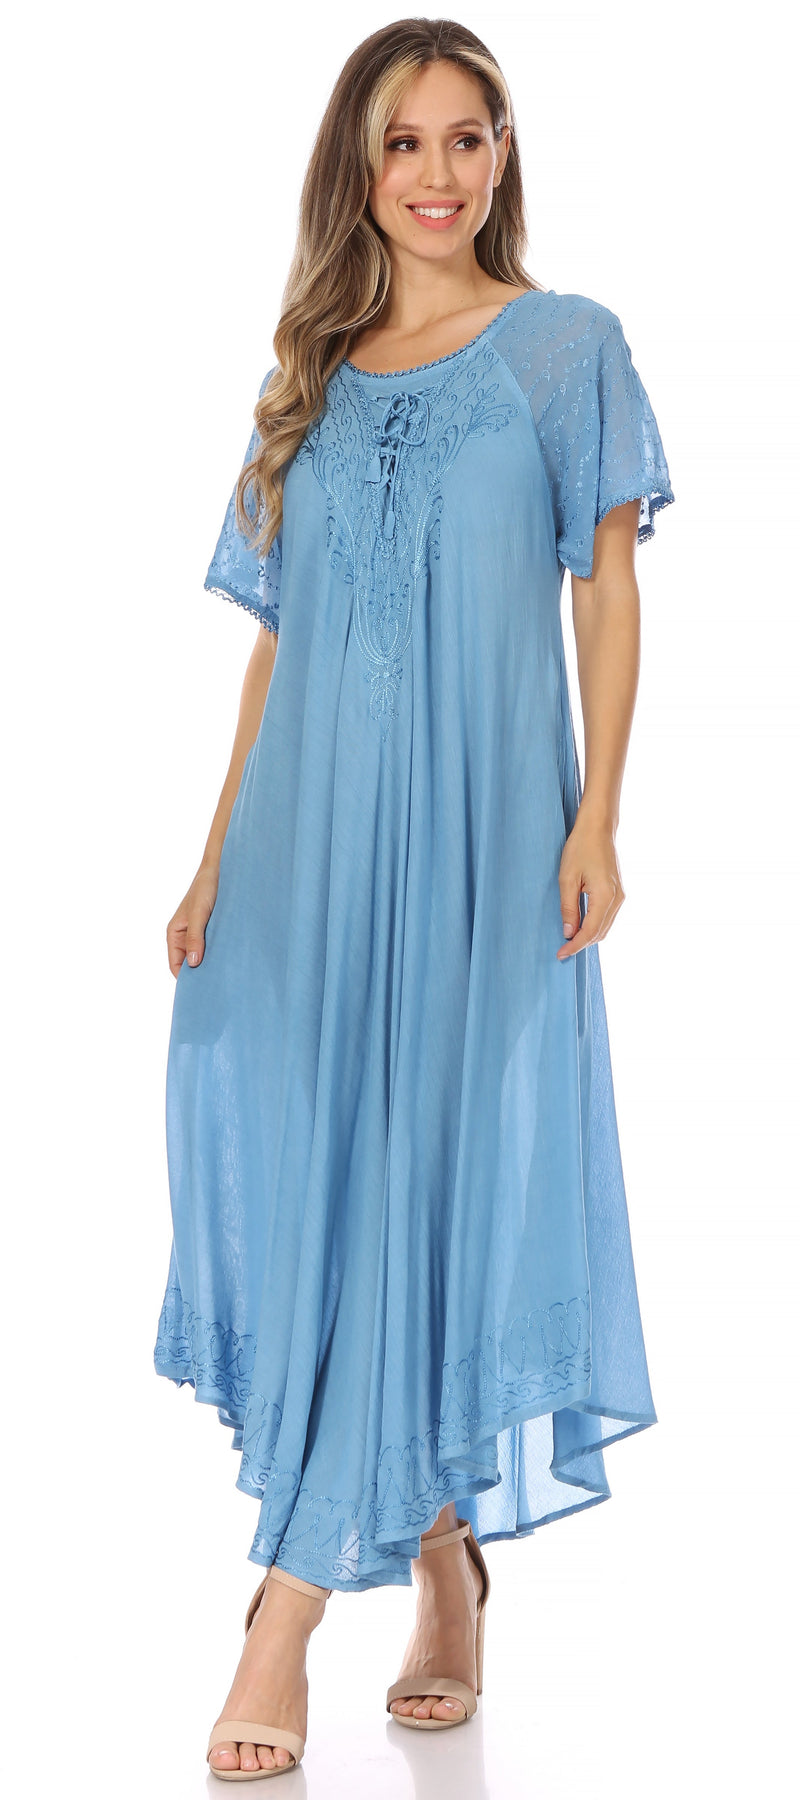 Sakkas Egan Women's Long Embroidered Caftan Dress / Cover Up With Embroidered Cap Sleeves